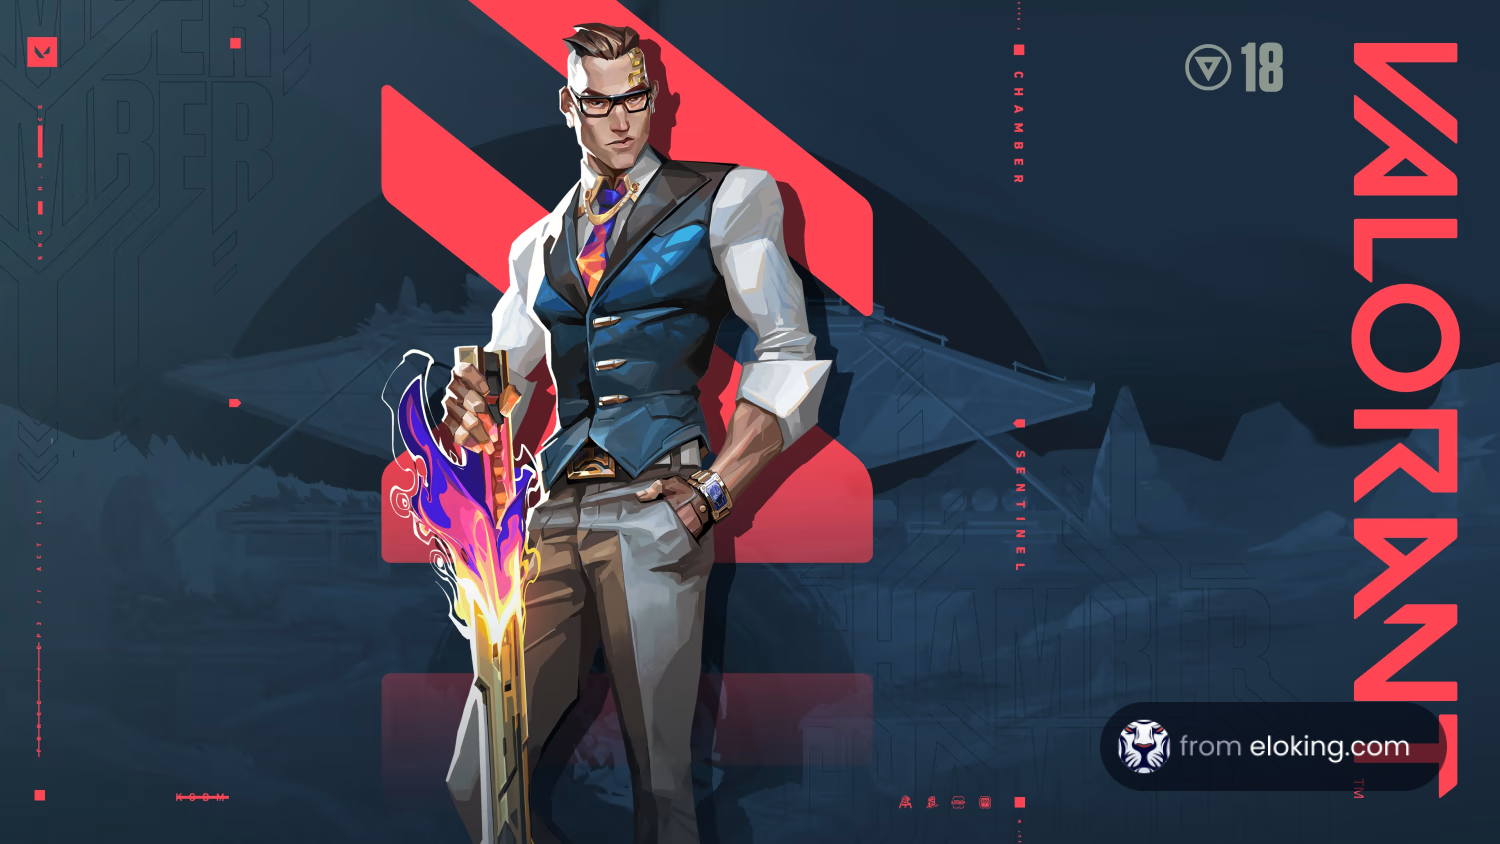 Stylish animated character in a vest and glasses holding a fiery weapon, with a futuristic background